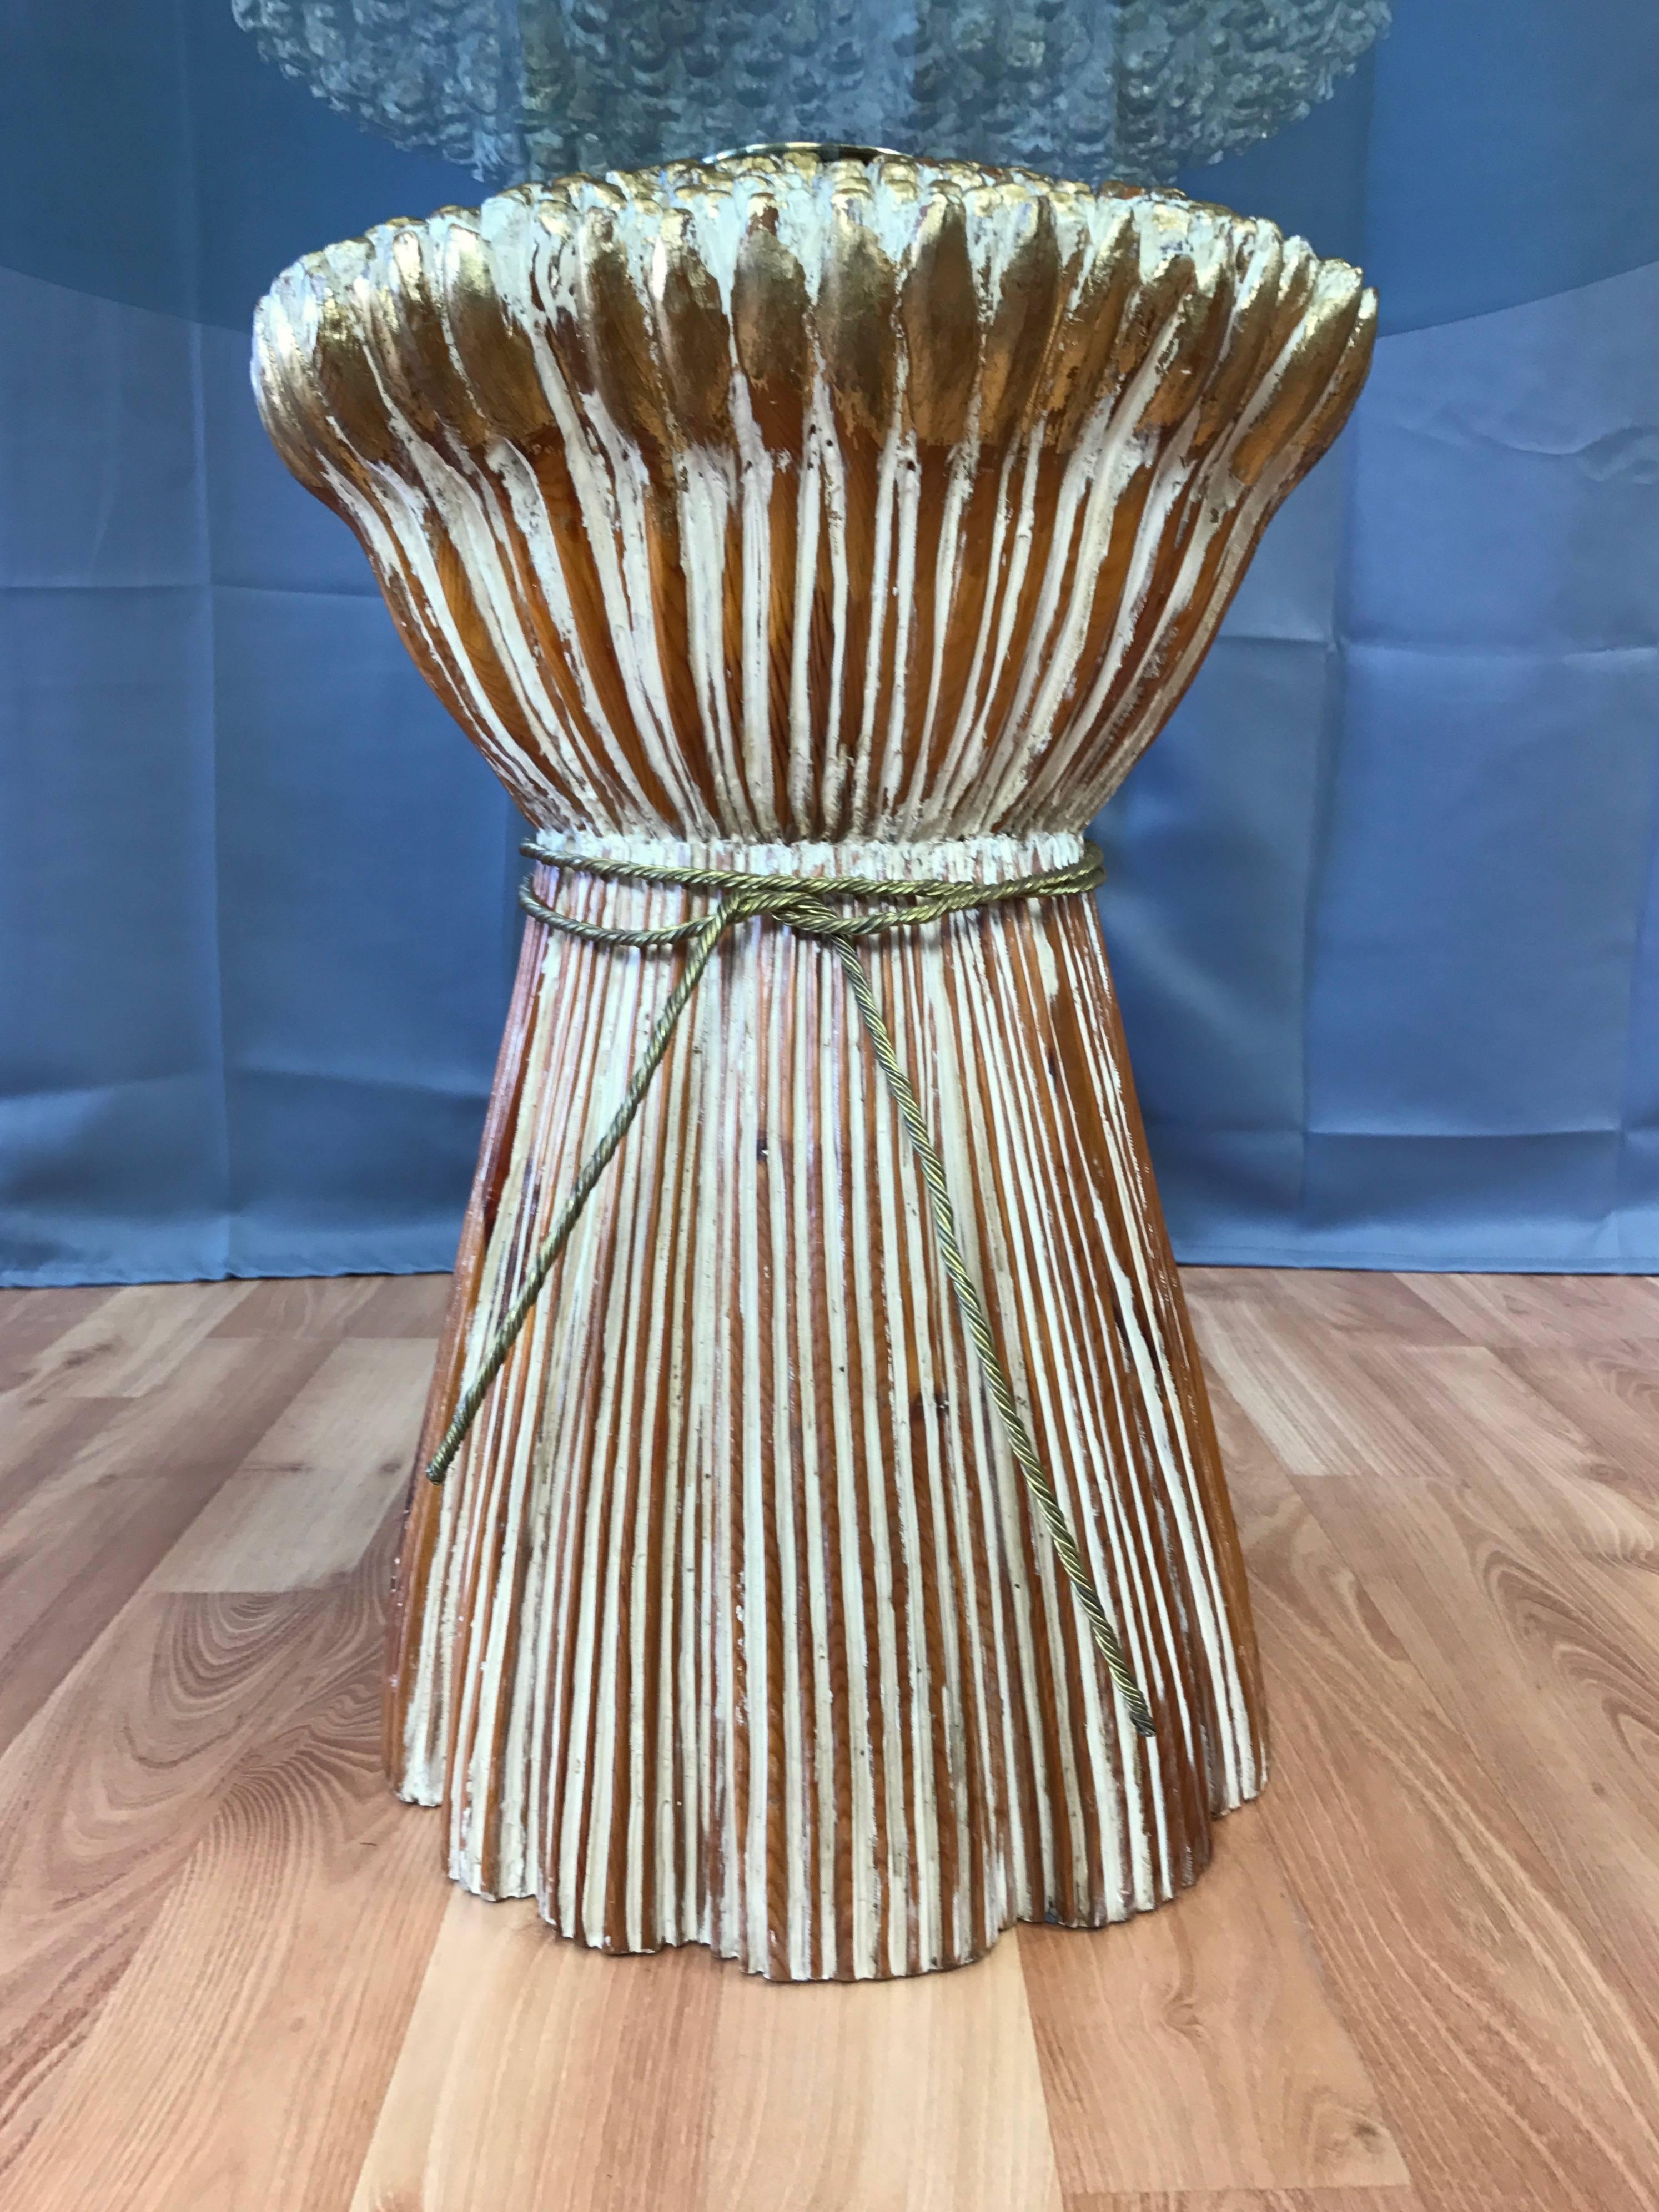 Italian Sculptural Carved Wood Wheat Sheaf Table with Glass Top For Sale